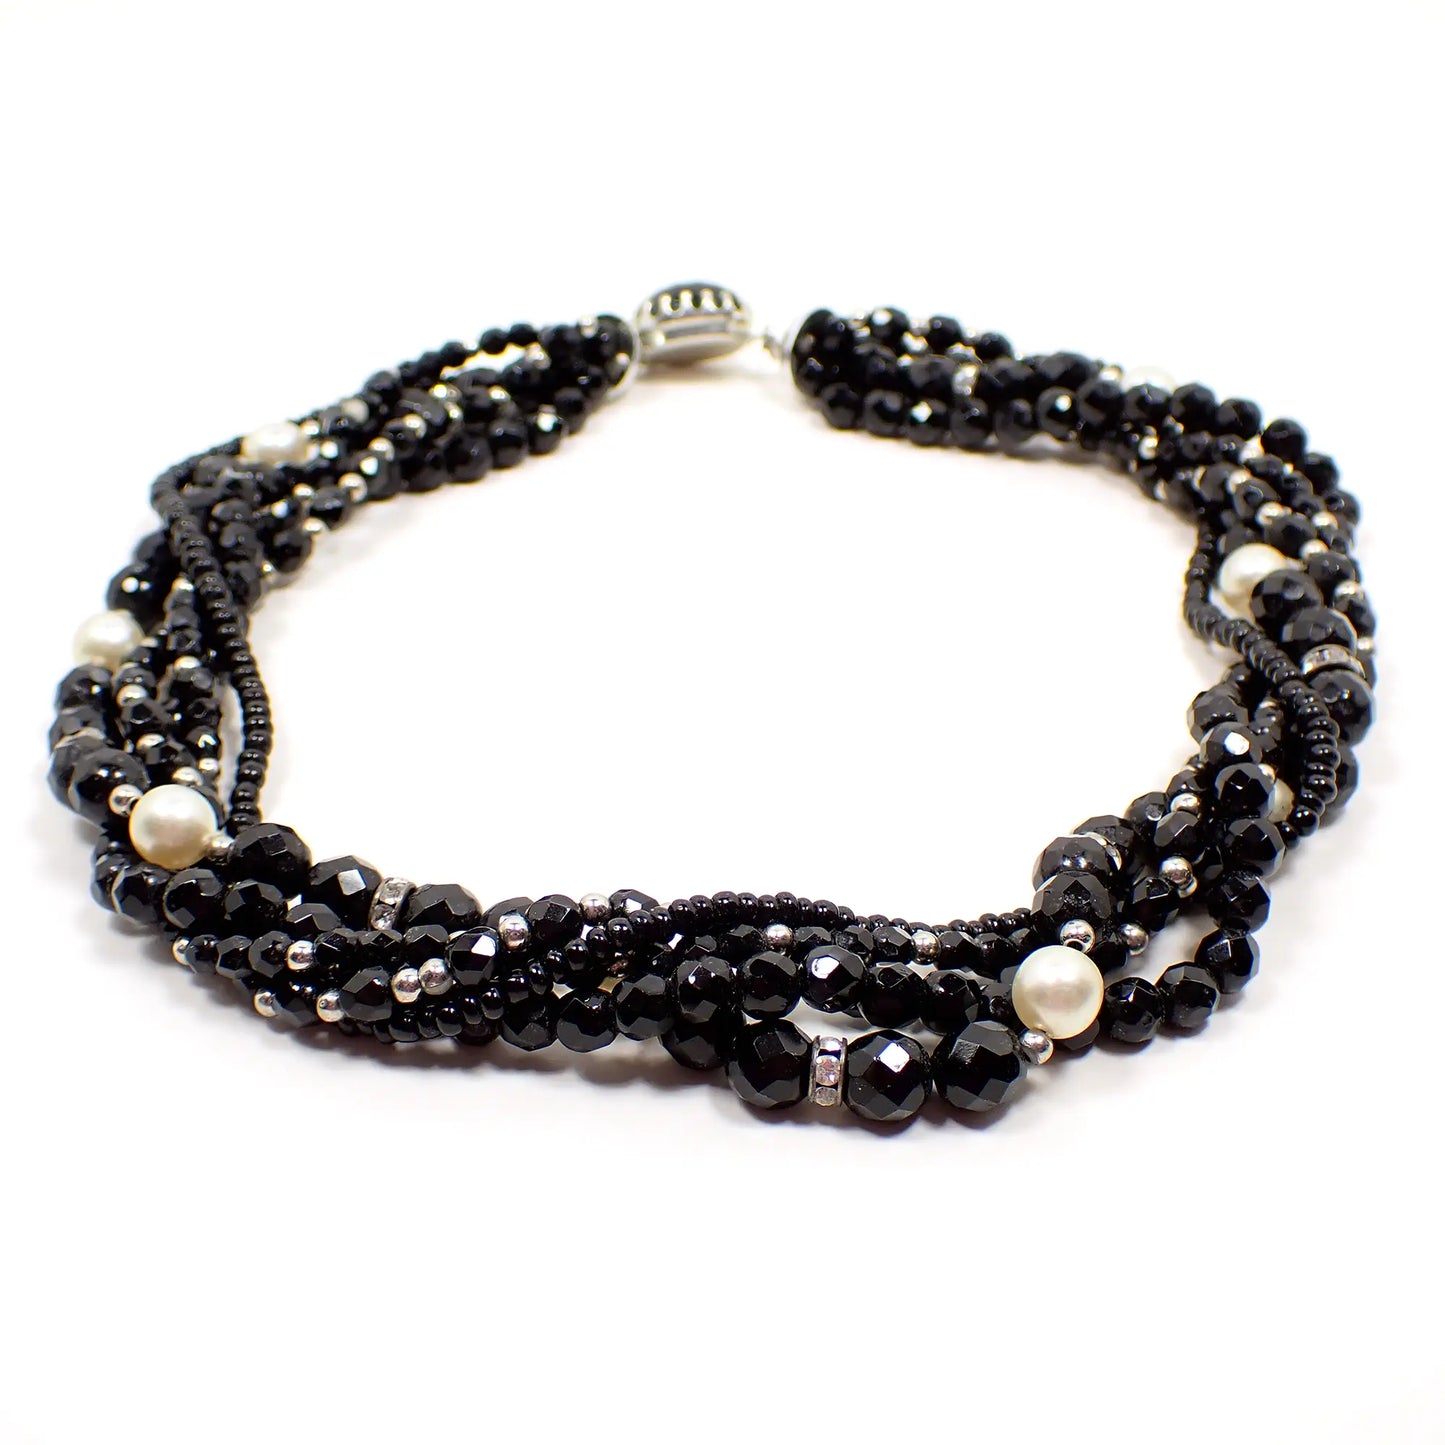 Faceted Black Glass and Faux Pearl Beaded Mid Century Vintage Multi Strand Necklace